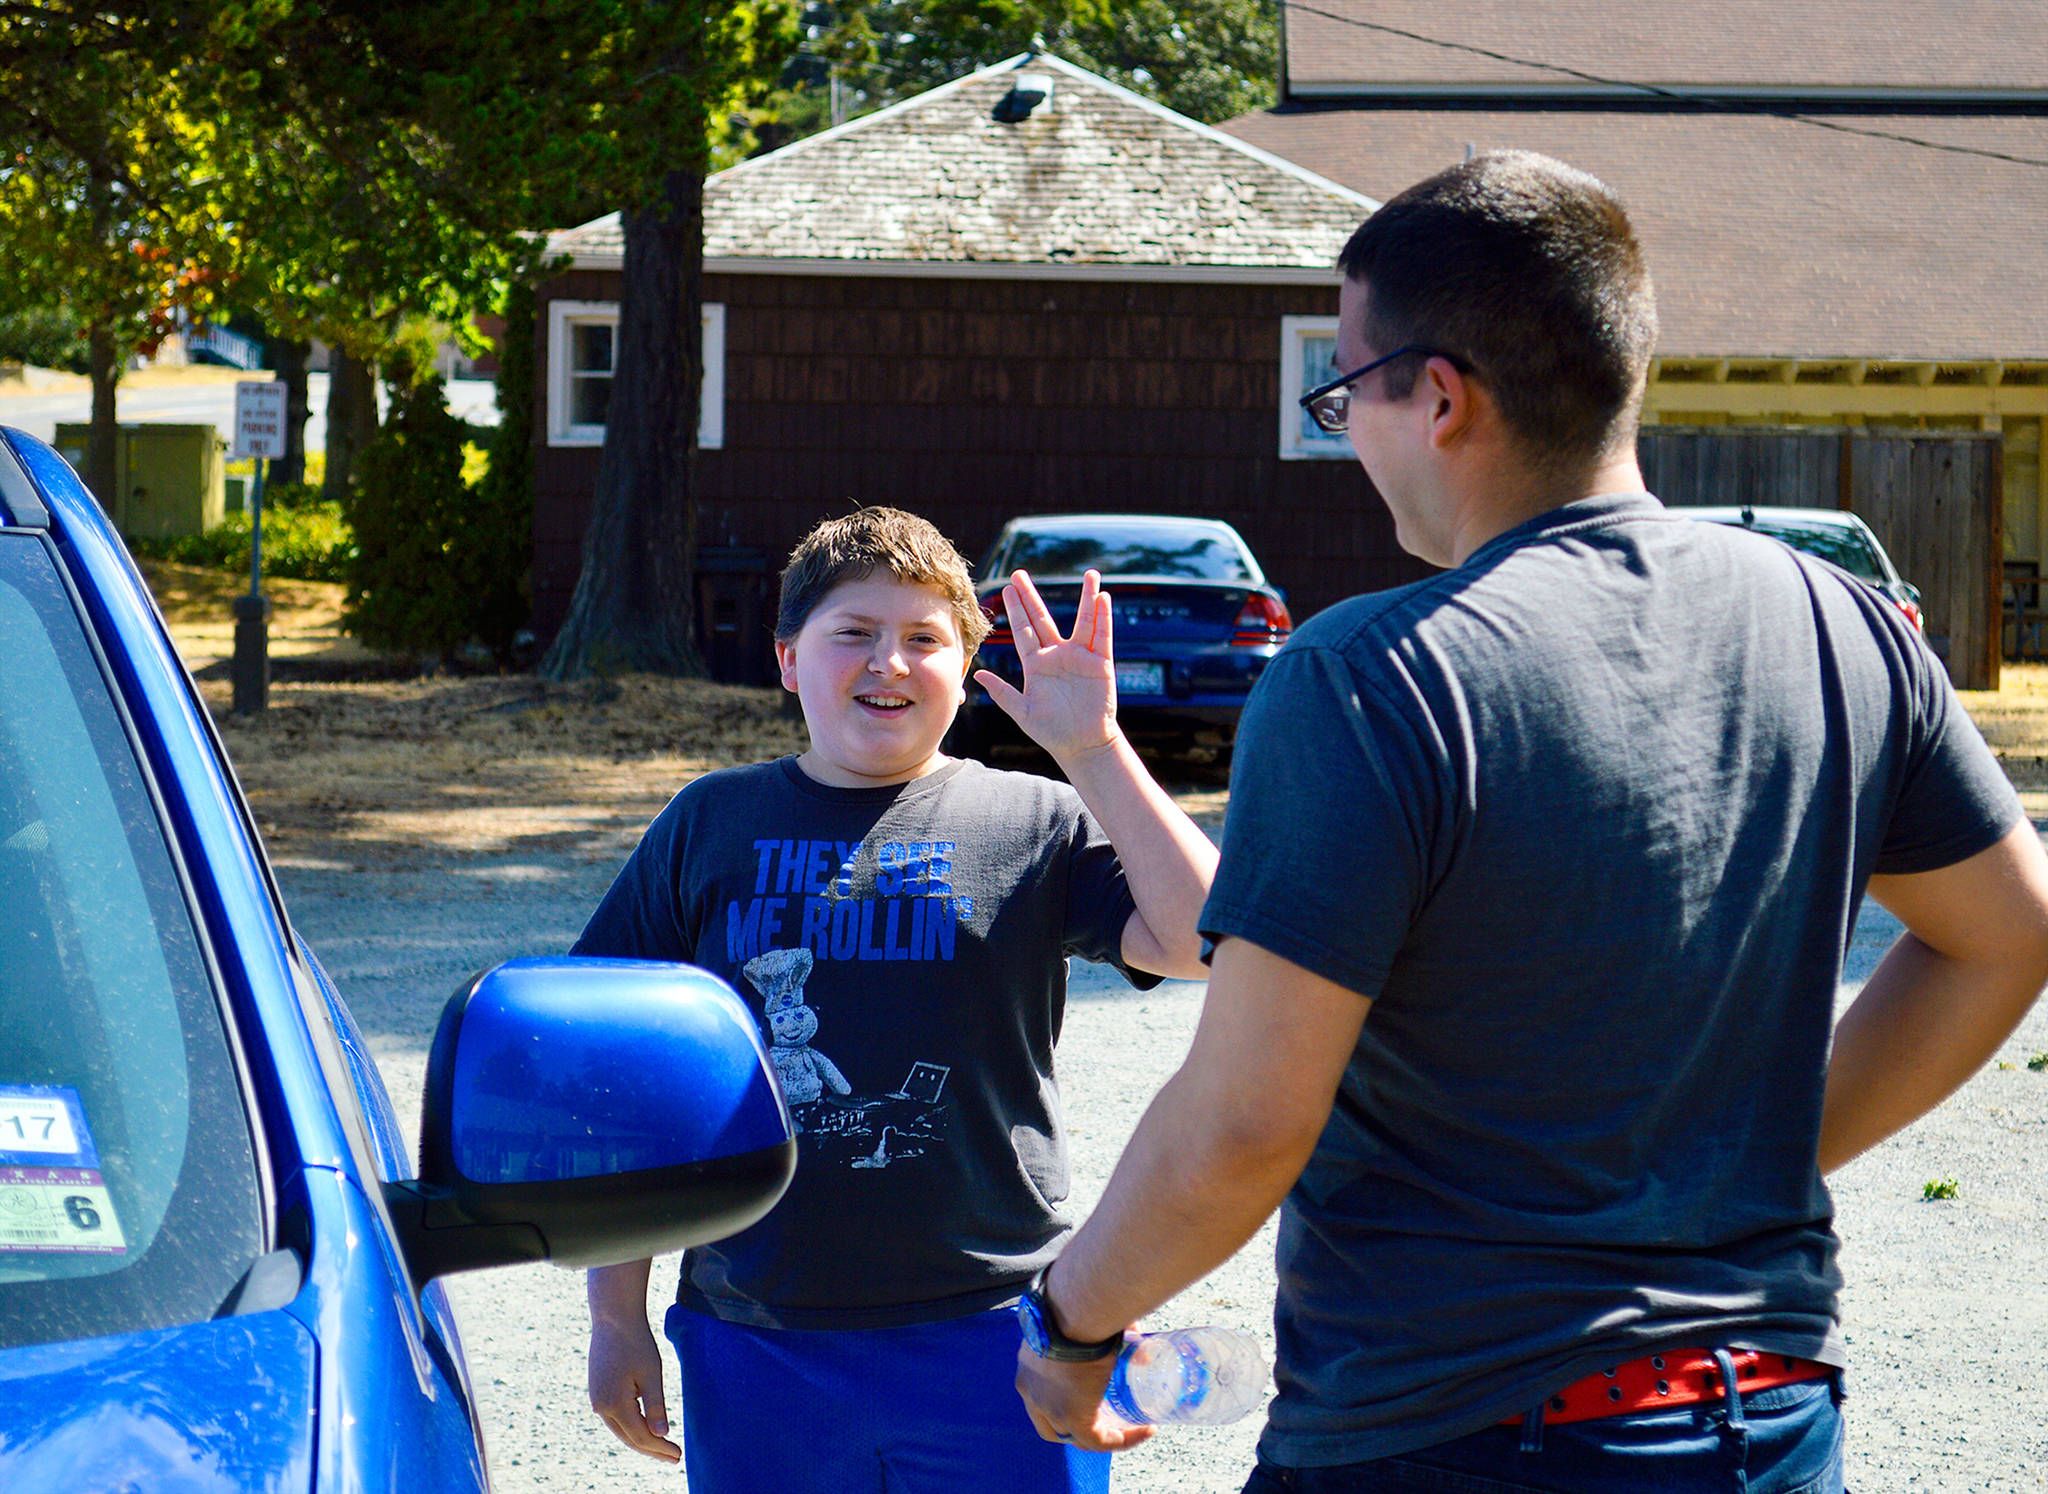 Matthew Smith flashes the “live long and prosper” sign before leaving with his “Big,” James Lopez, to go get ice cream. The two have been matched for eight months through Big Brothers Big Sisters Island County’s community-based mentoring program. The two are self-described “nerds.” Photo by Laura Guido/Whidbey News-Times